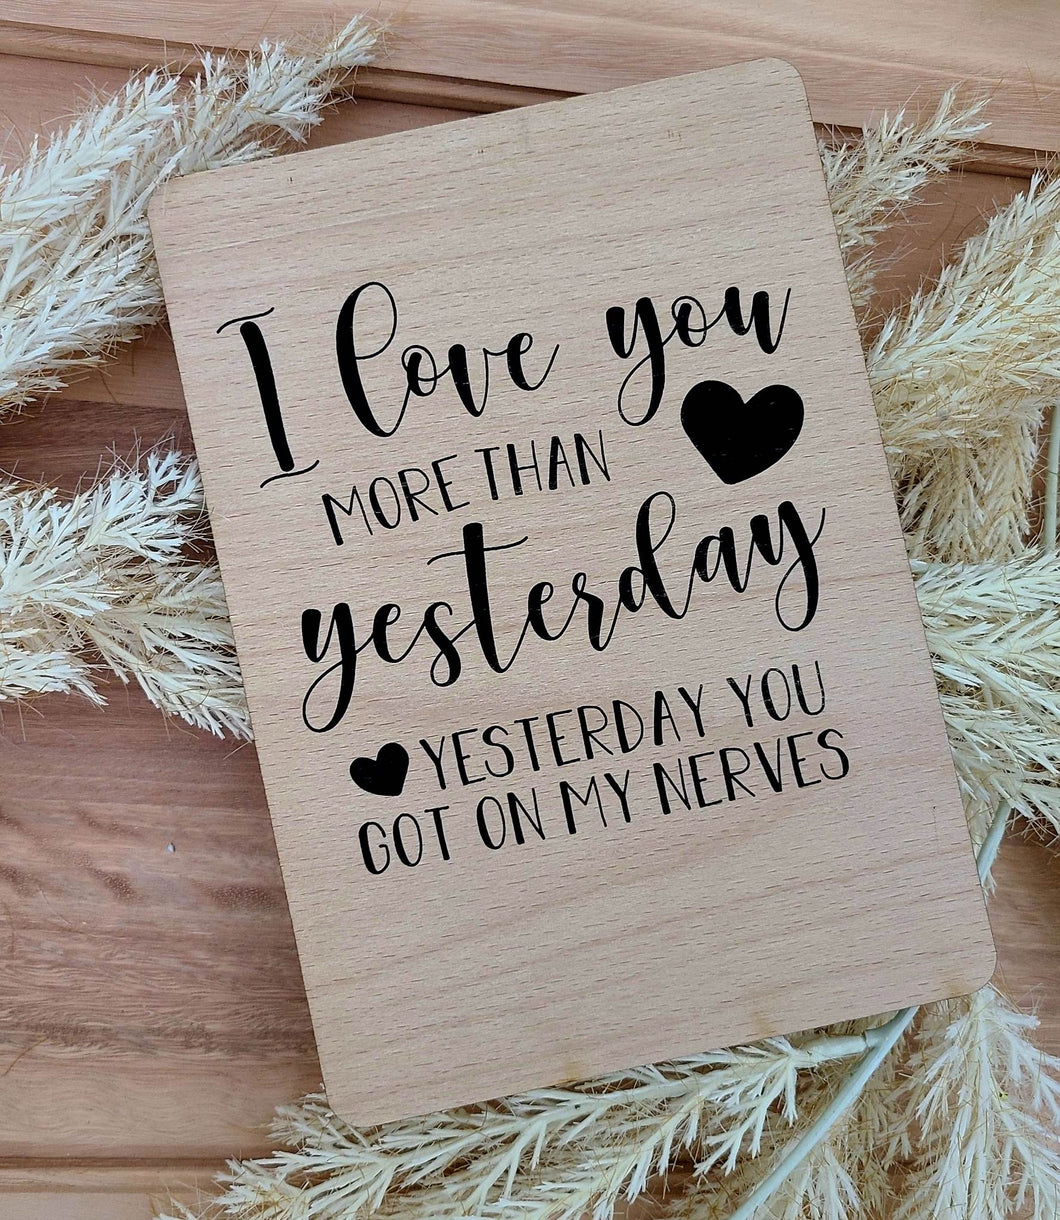 I LOVE YOU MORE THAN YESTERDAY, YESTERDAY YOU GO ON MY NERVES WOOD CARD VALENTINES DAY